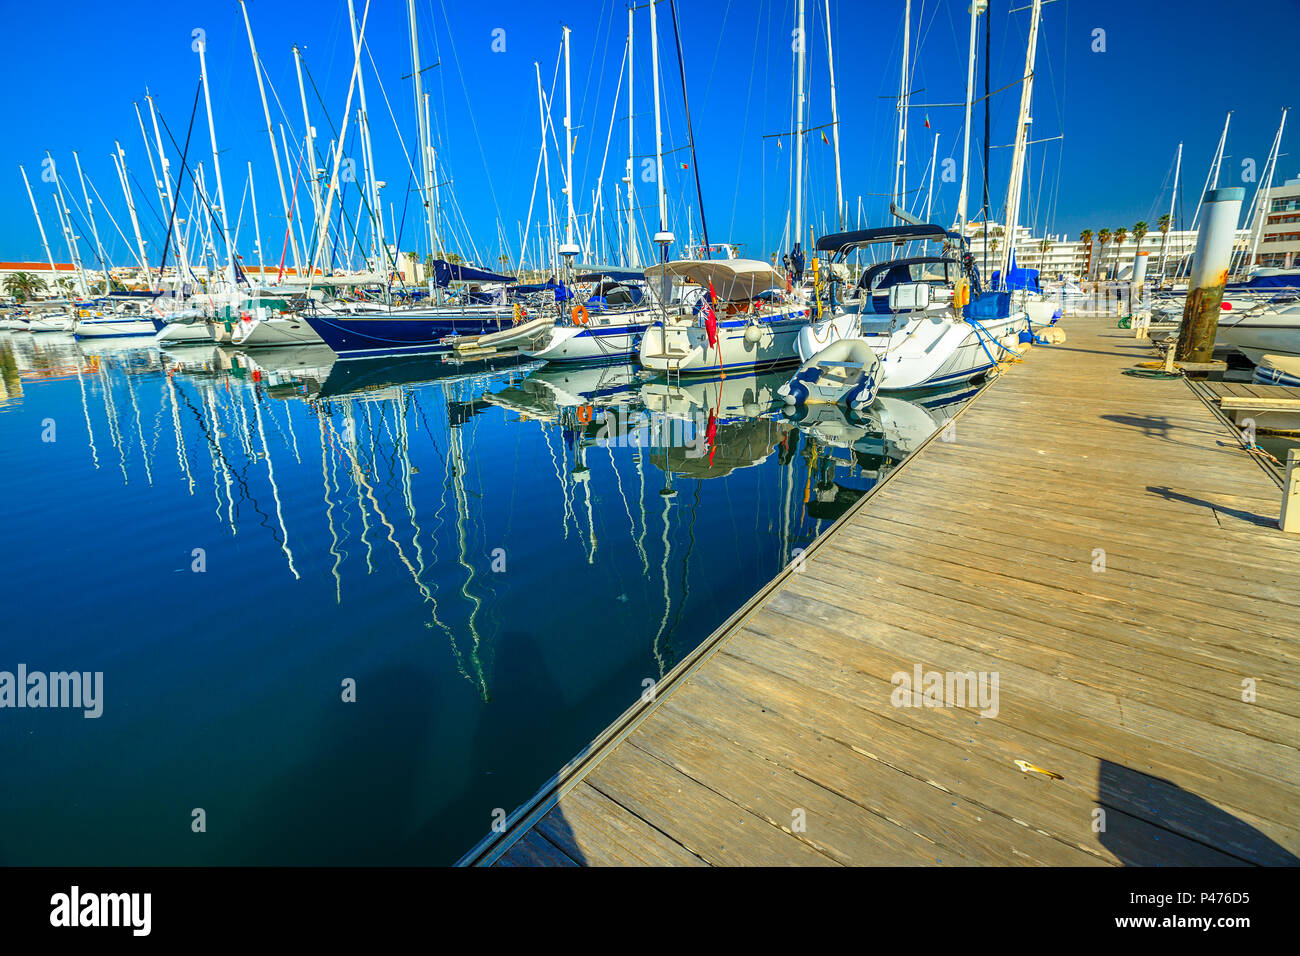 Wooden jetty with sailboats reflected on blue sea in Bay of Lagos. Landscape of Marina de Lagos on Algarve coast, Portugal, Europe. Summer holidays. Stock Photo